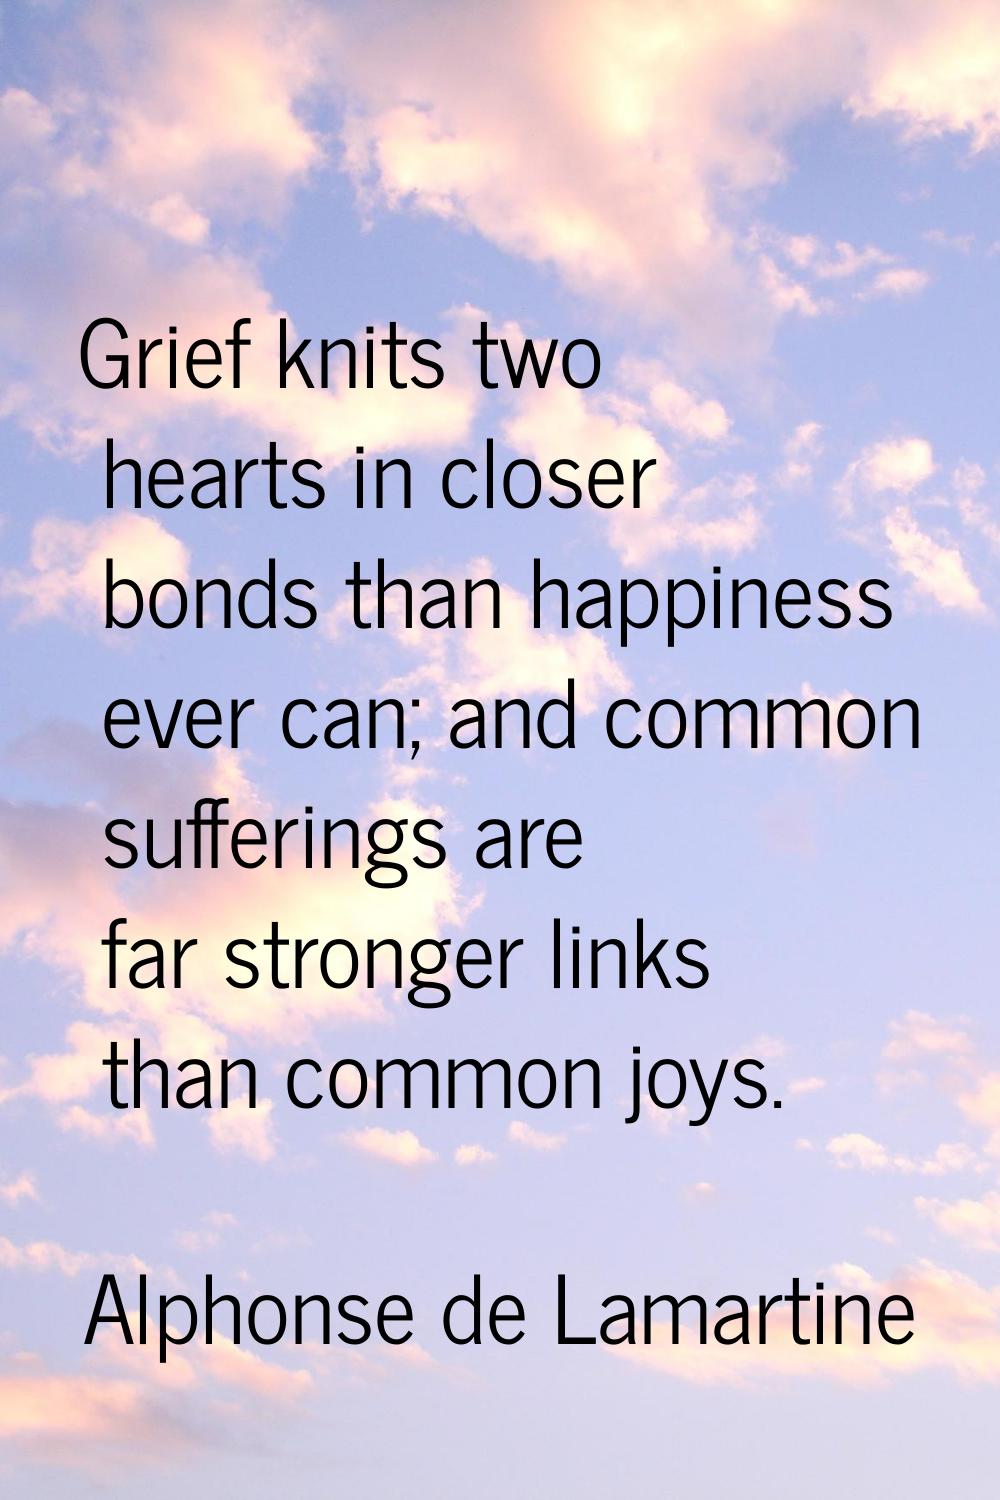 Grief knits two hearts in closer bonds than happiness ever can; and common sufferings are far stron